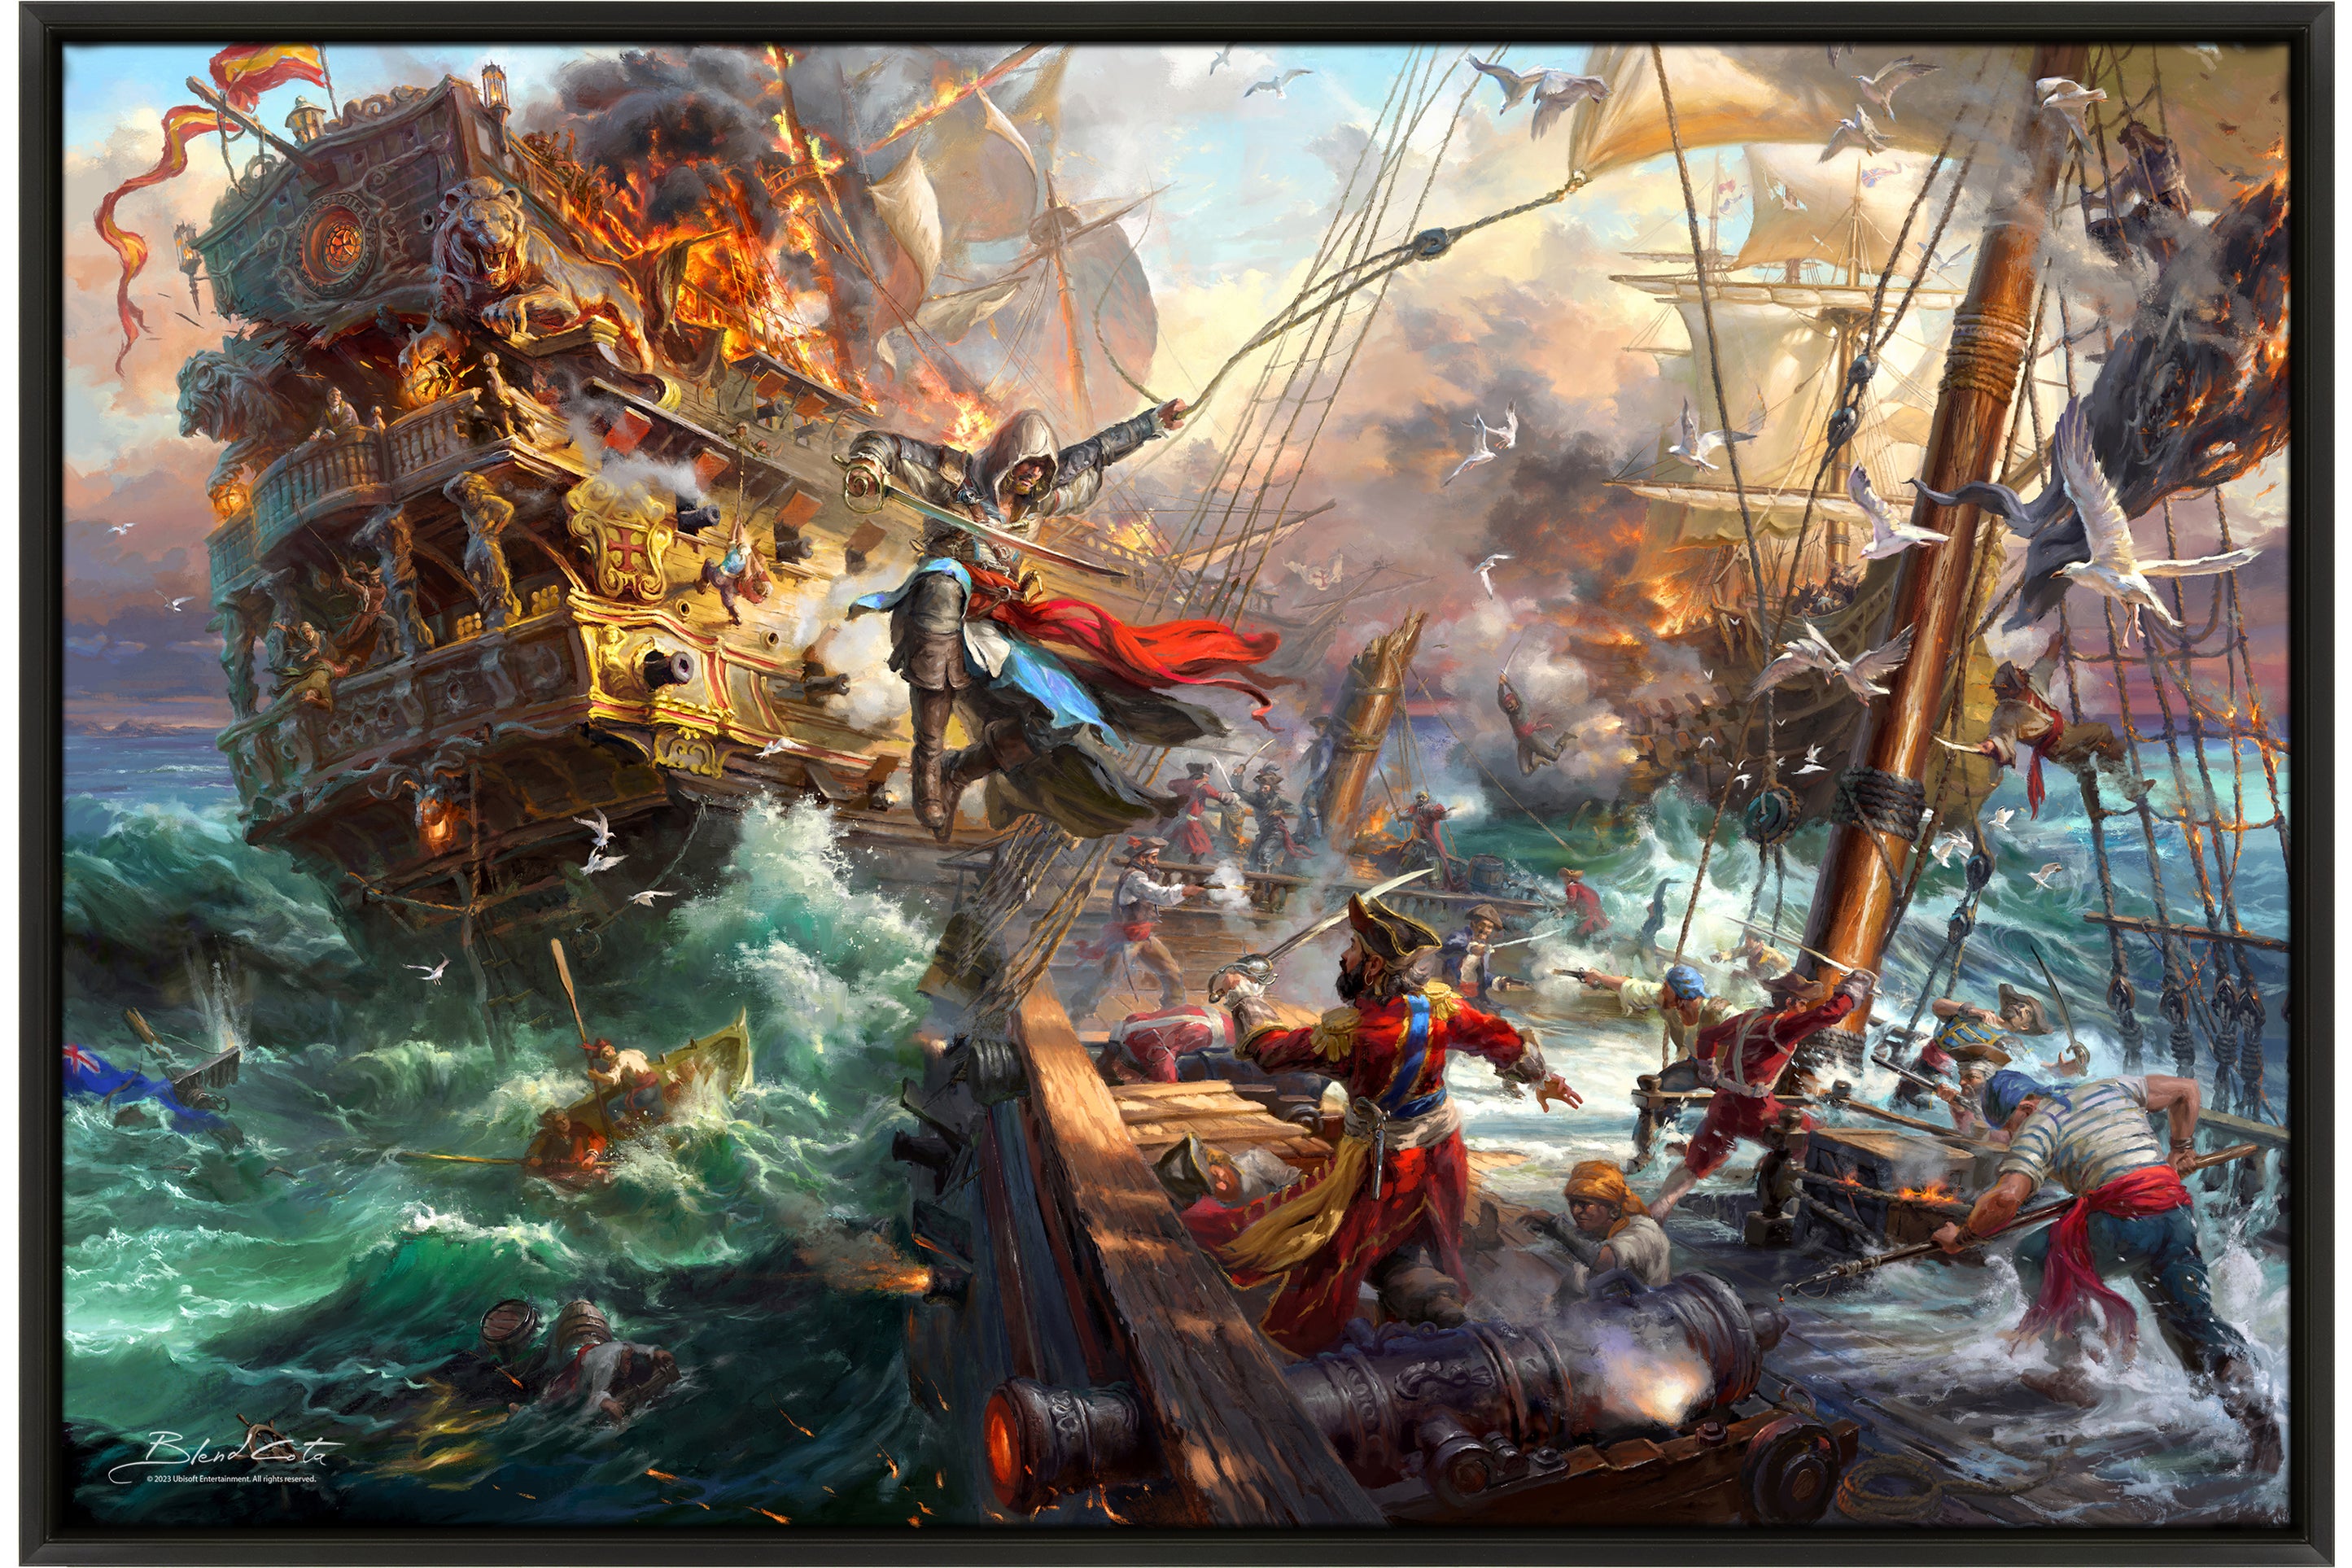 A naval battle at sea from Ubisoft's Assassin's Creed IV Black Flag with Edward Kenway and Bartholomew Roberts fighting on deck in this painting in a black frame.